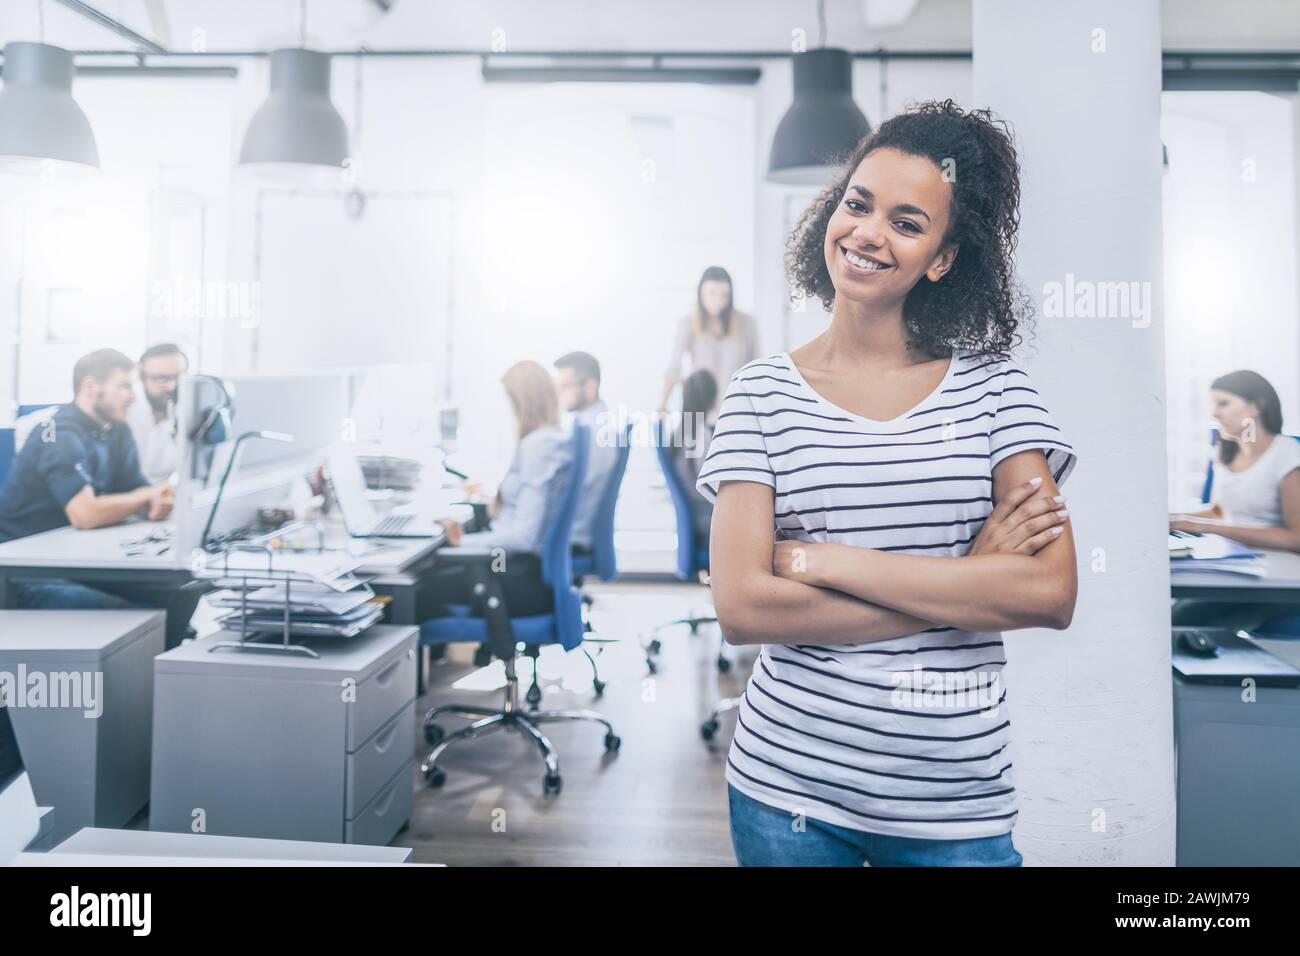 Portrait of young confident woman leader standing in office. New start up business concept. Stock Photo